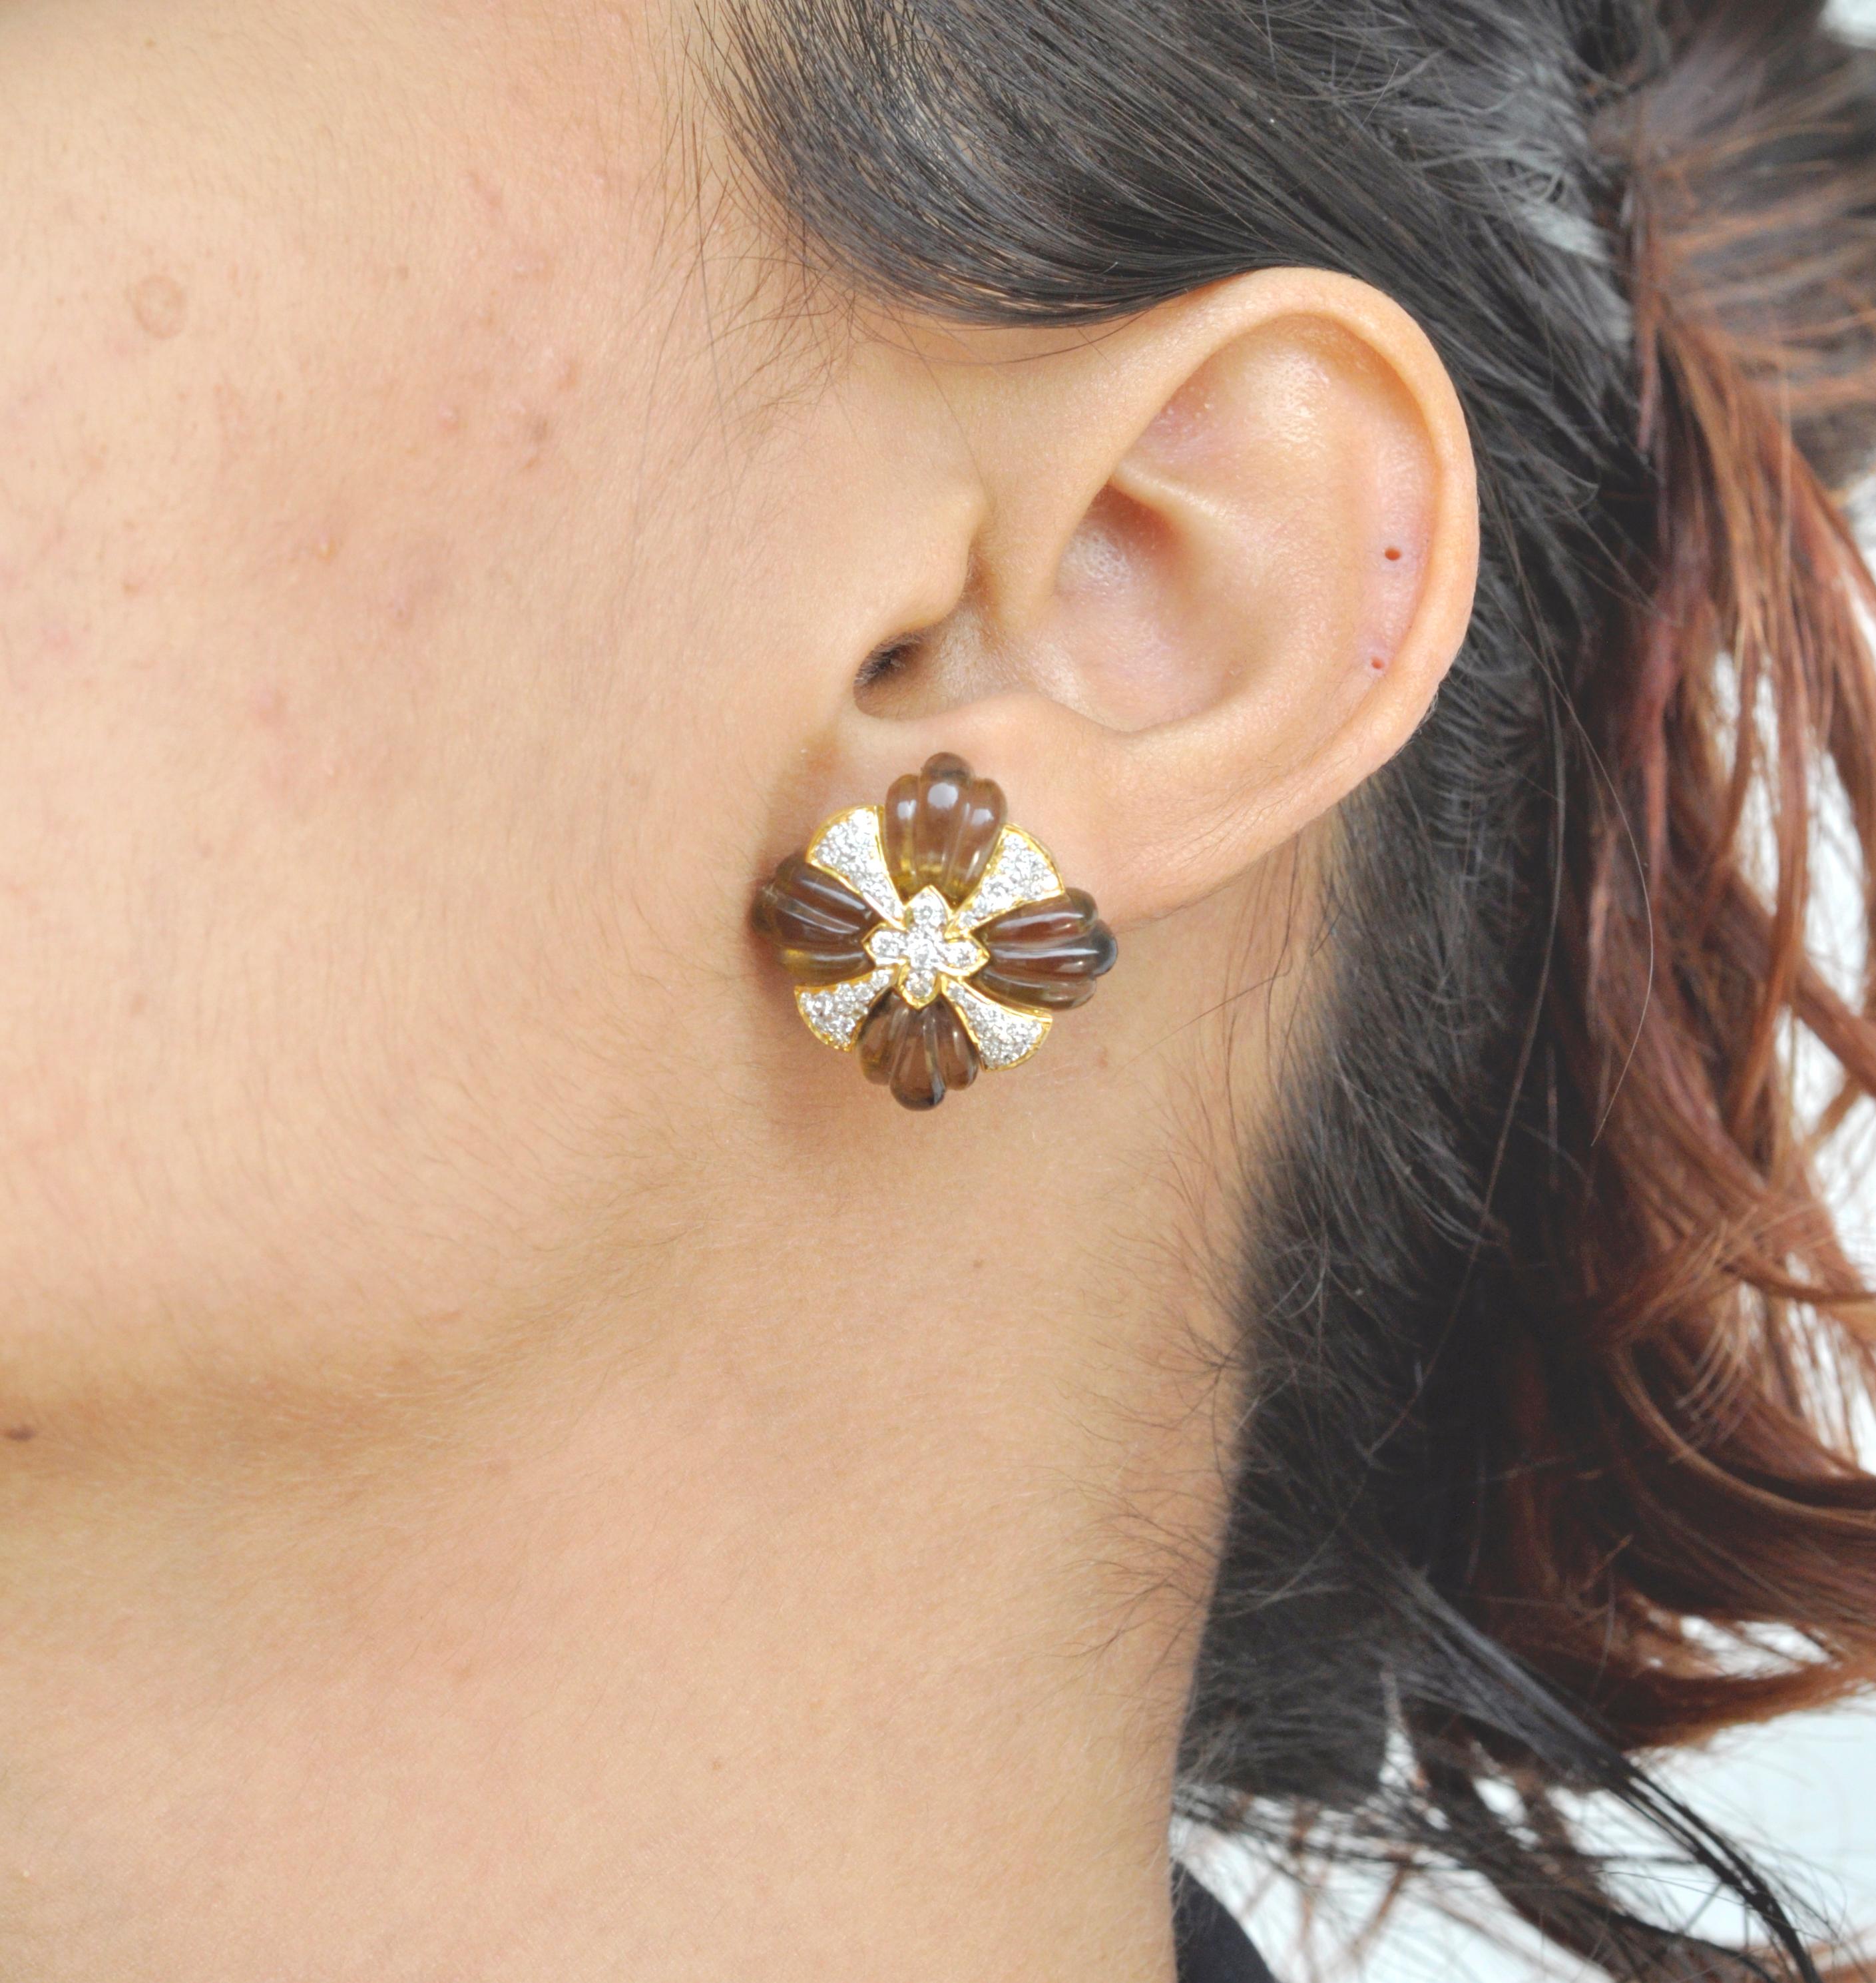 A beautiful classic yet unique smoky quartz carving stud earring is a chic piece to have in your jewelry closet. The earrings uses 18 Karat yellow gold with diamonds and smoky quartz carving precisely set in the shape of a wheel complimented by pave